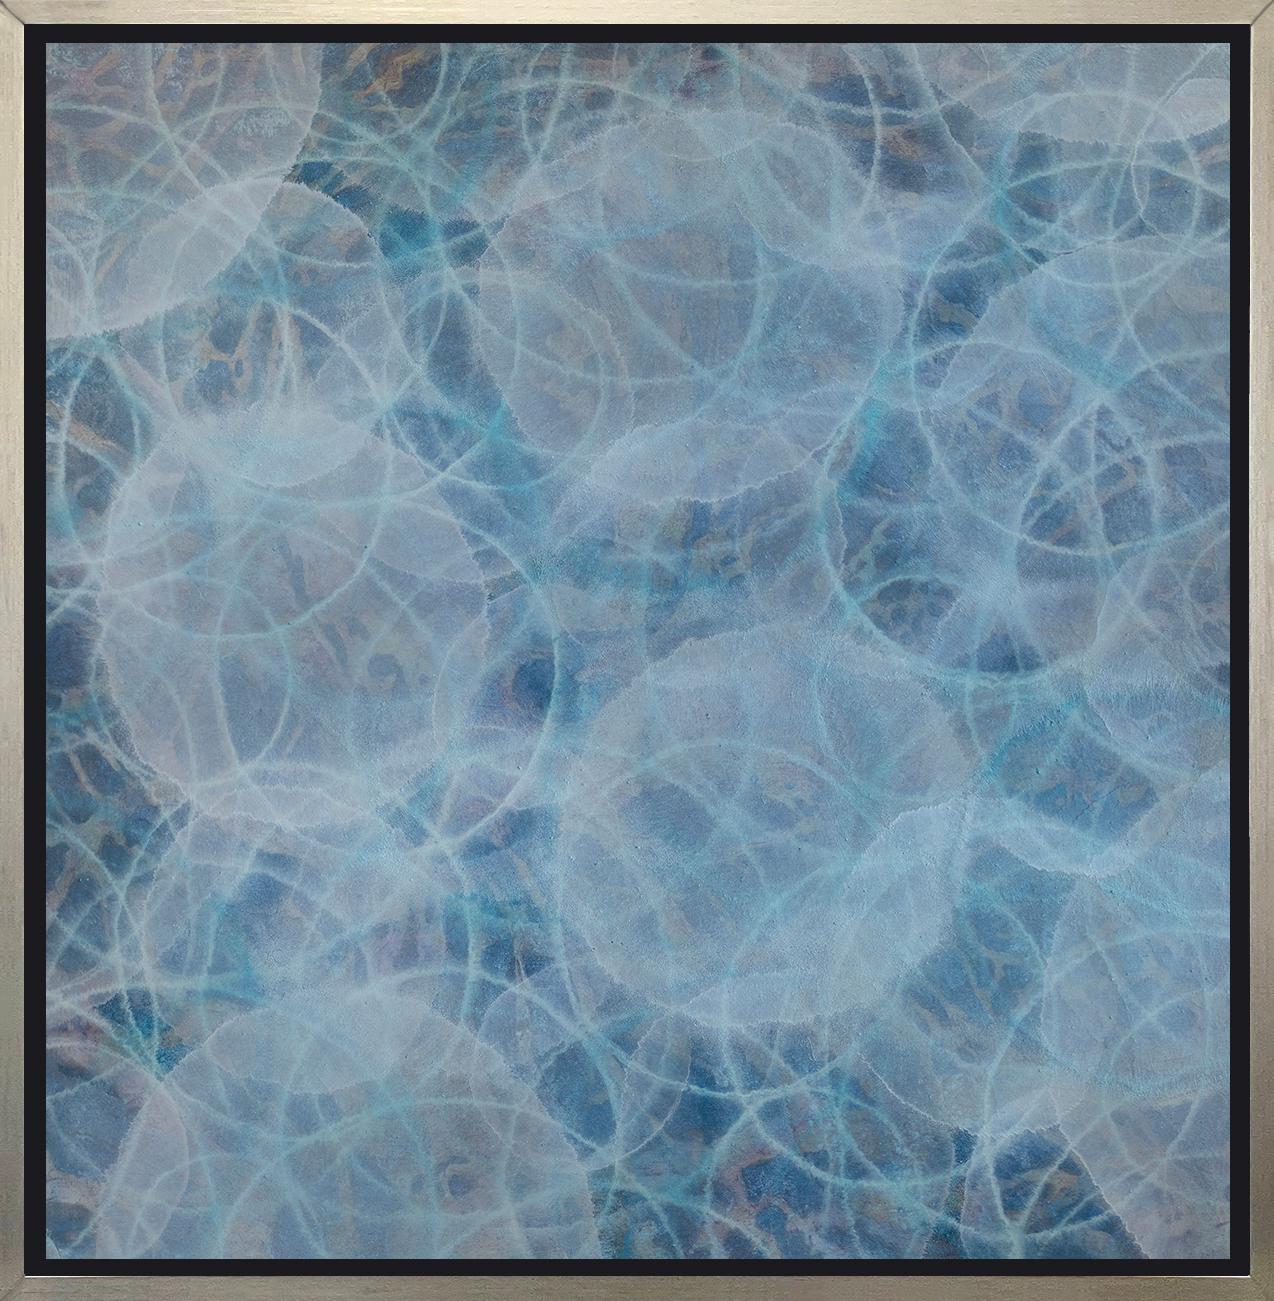 Roger Mudre Abstract Print - "Convolvulos, " Framed Limited Edition Giclee Print, 30" x 30"